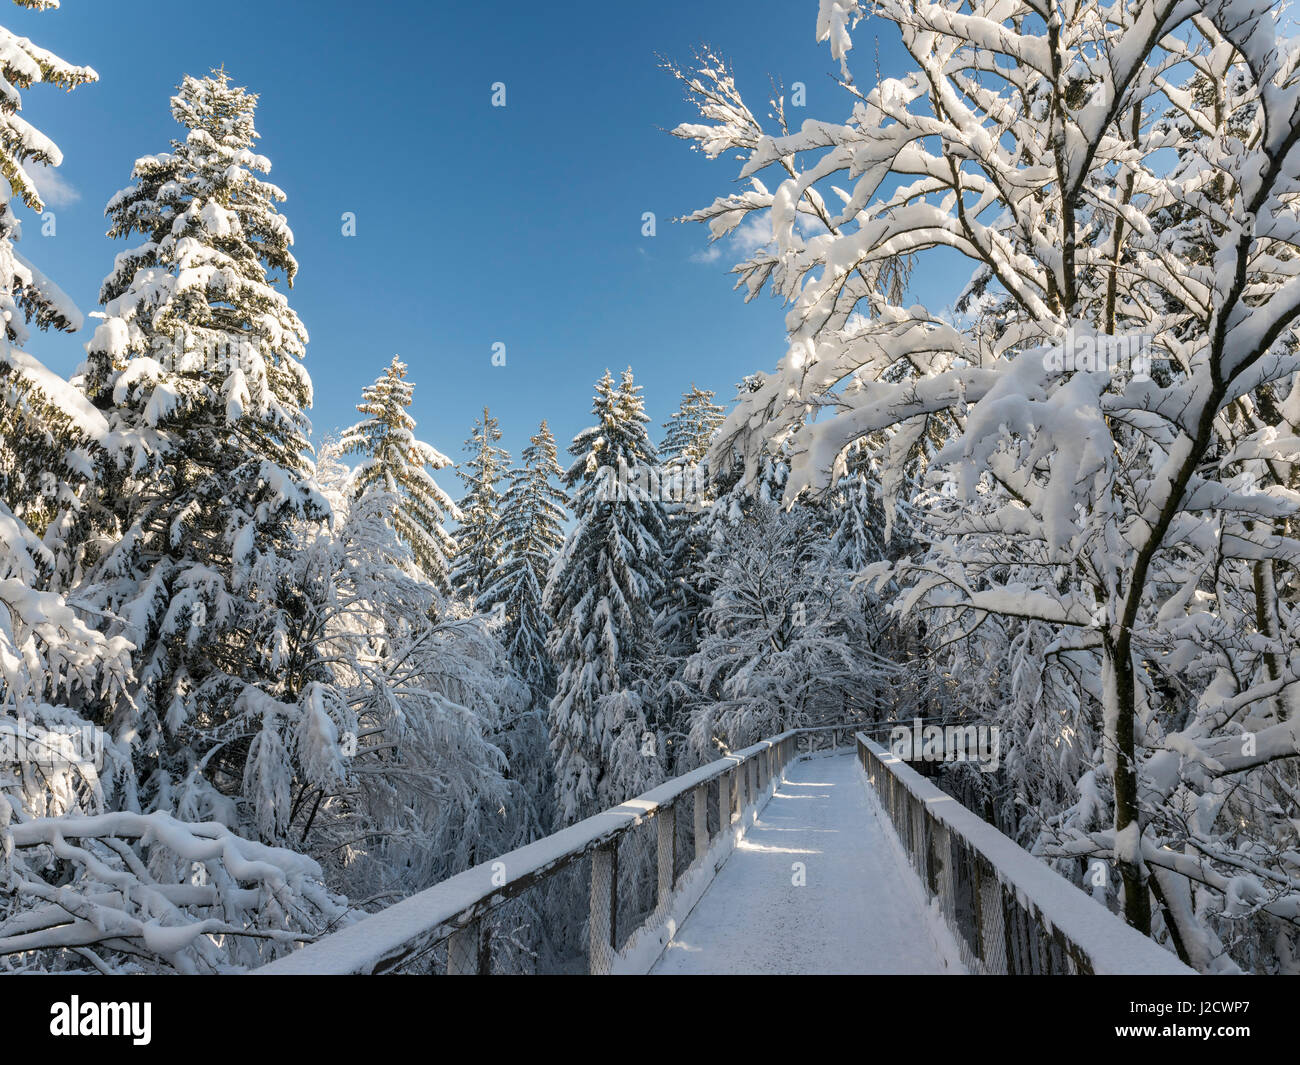 The Canopy Walkway (Baumwipfelpfad) of the visitor center of the National Park Bavarian Forest (Bayerischer Wald) in Neuschoenau in the deep of winter. Bavaria, Germany (Large format sizes available) Stock Photo